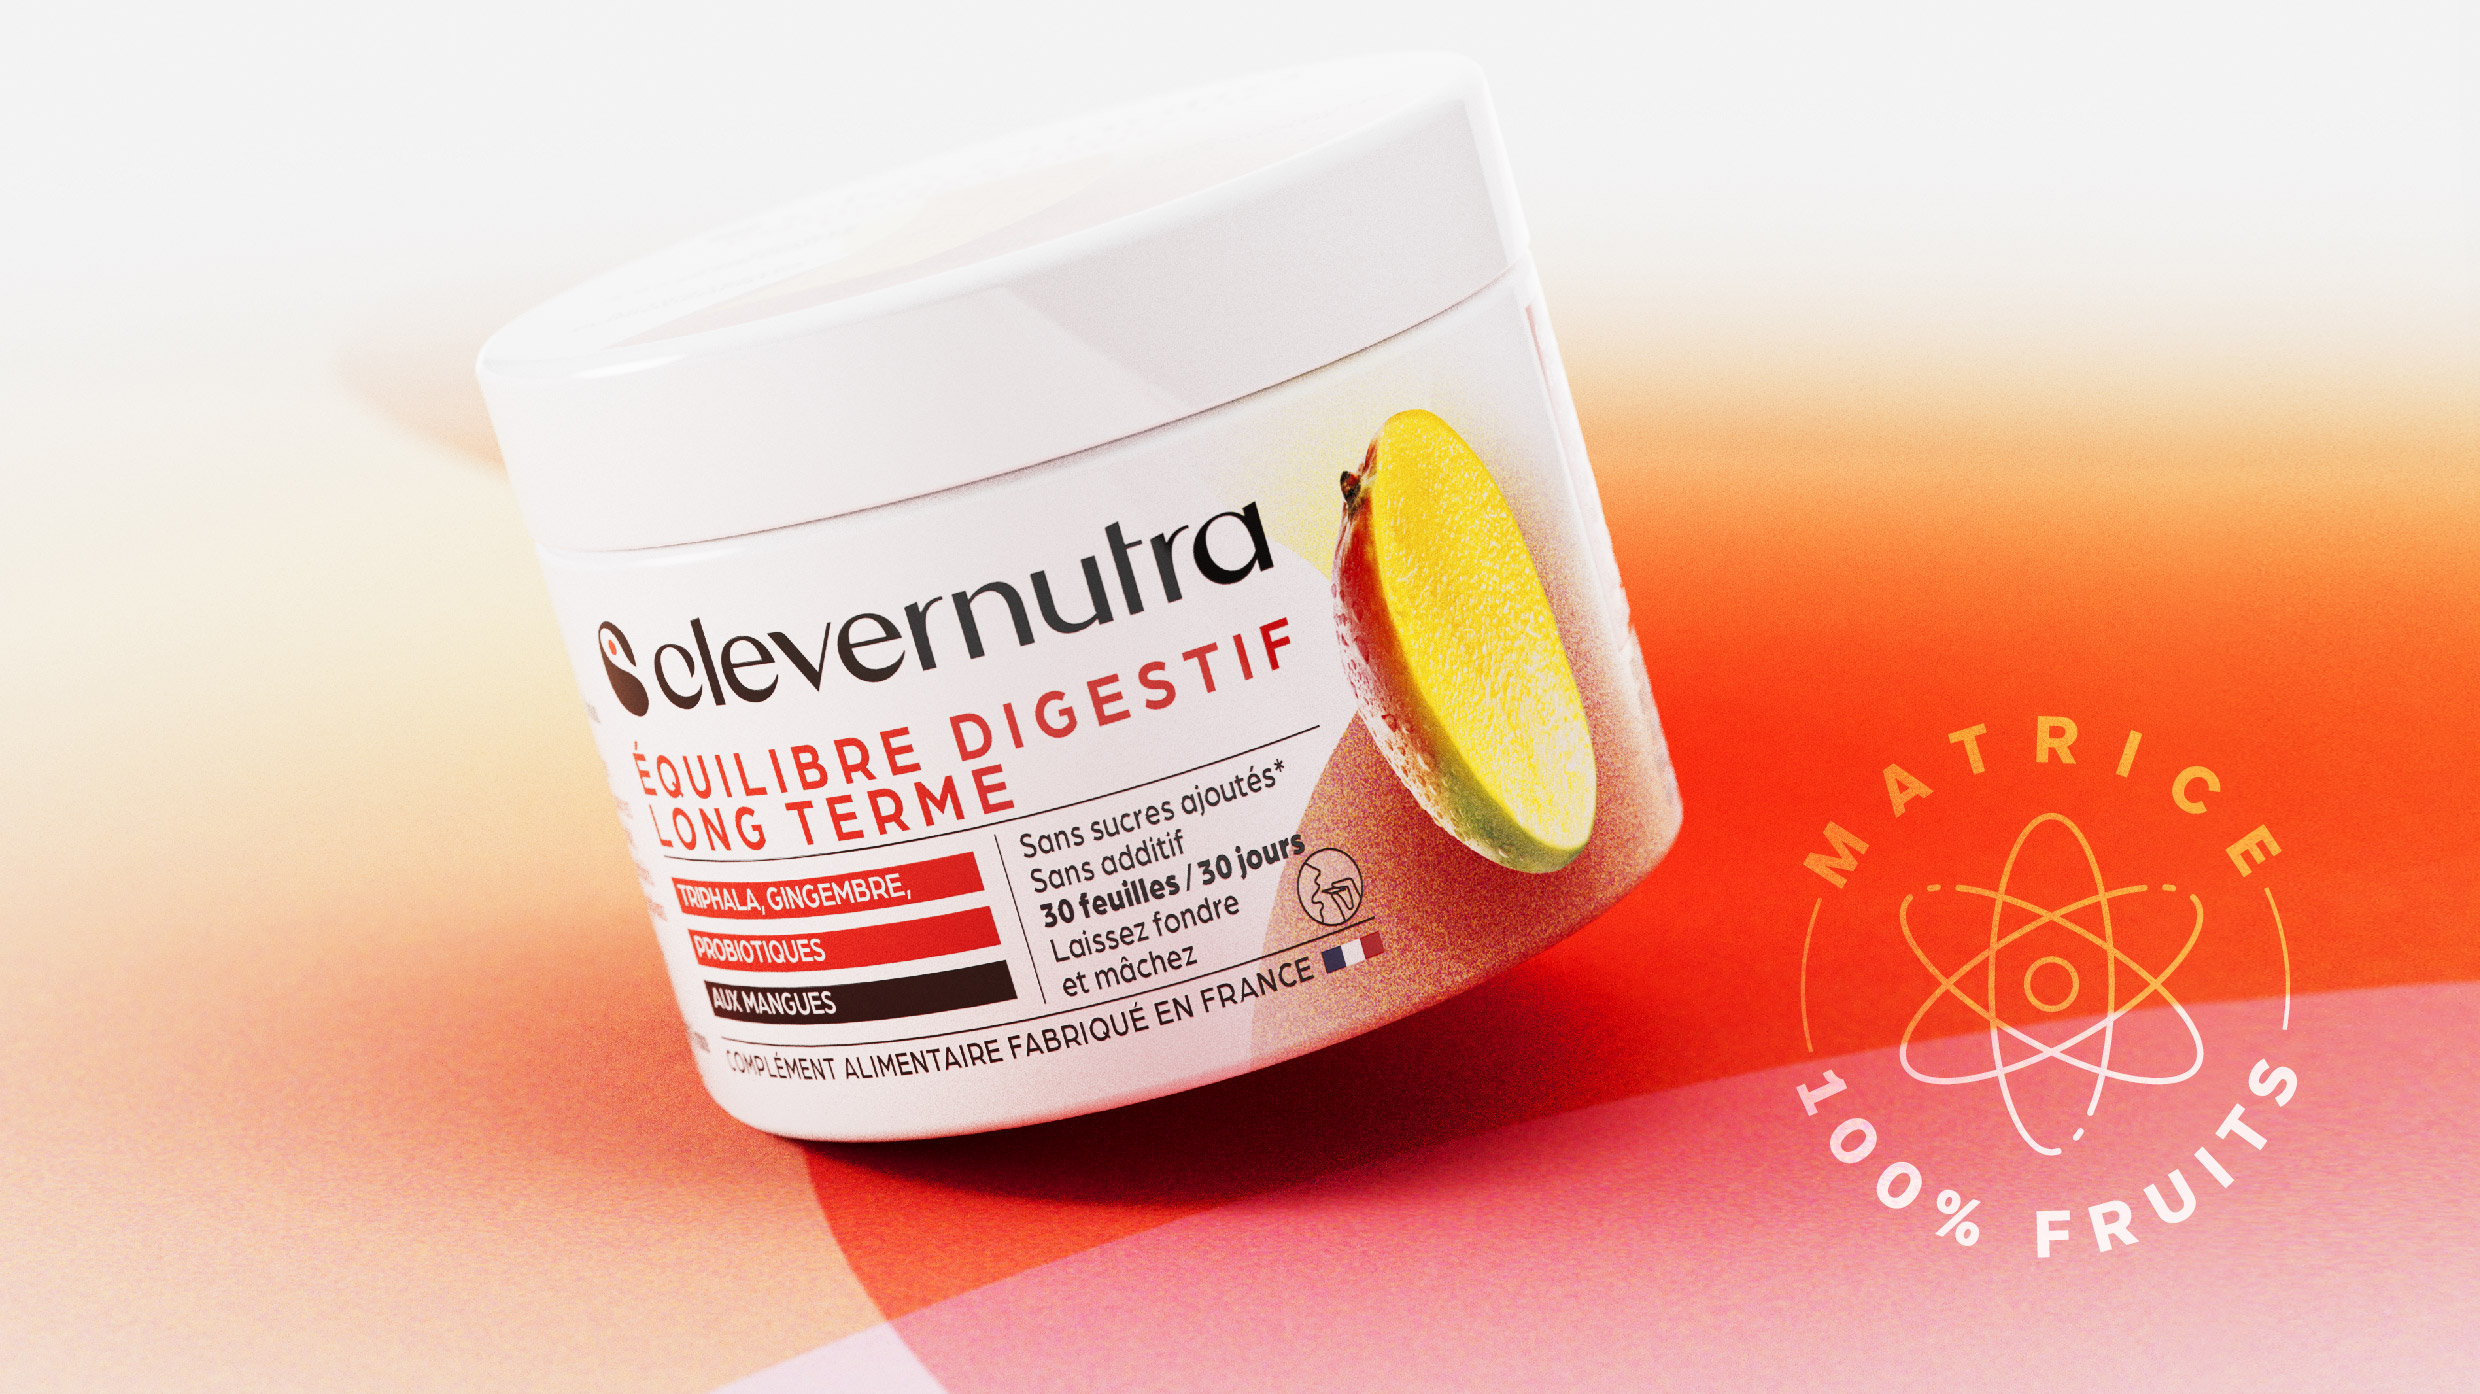 Lonsdale Created Clevernutra, a New Brand of Dietary Supplements for French Company Ais Nutrition